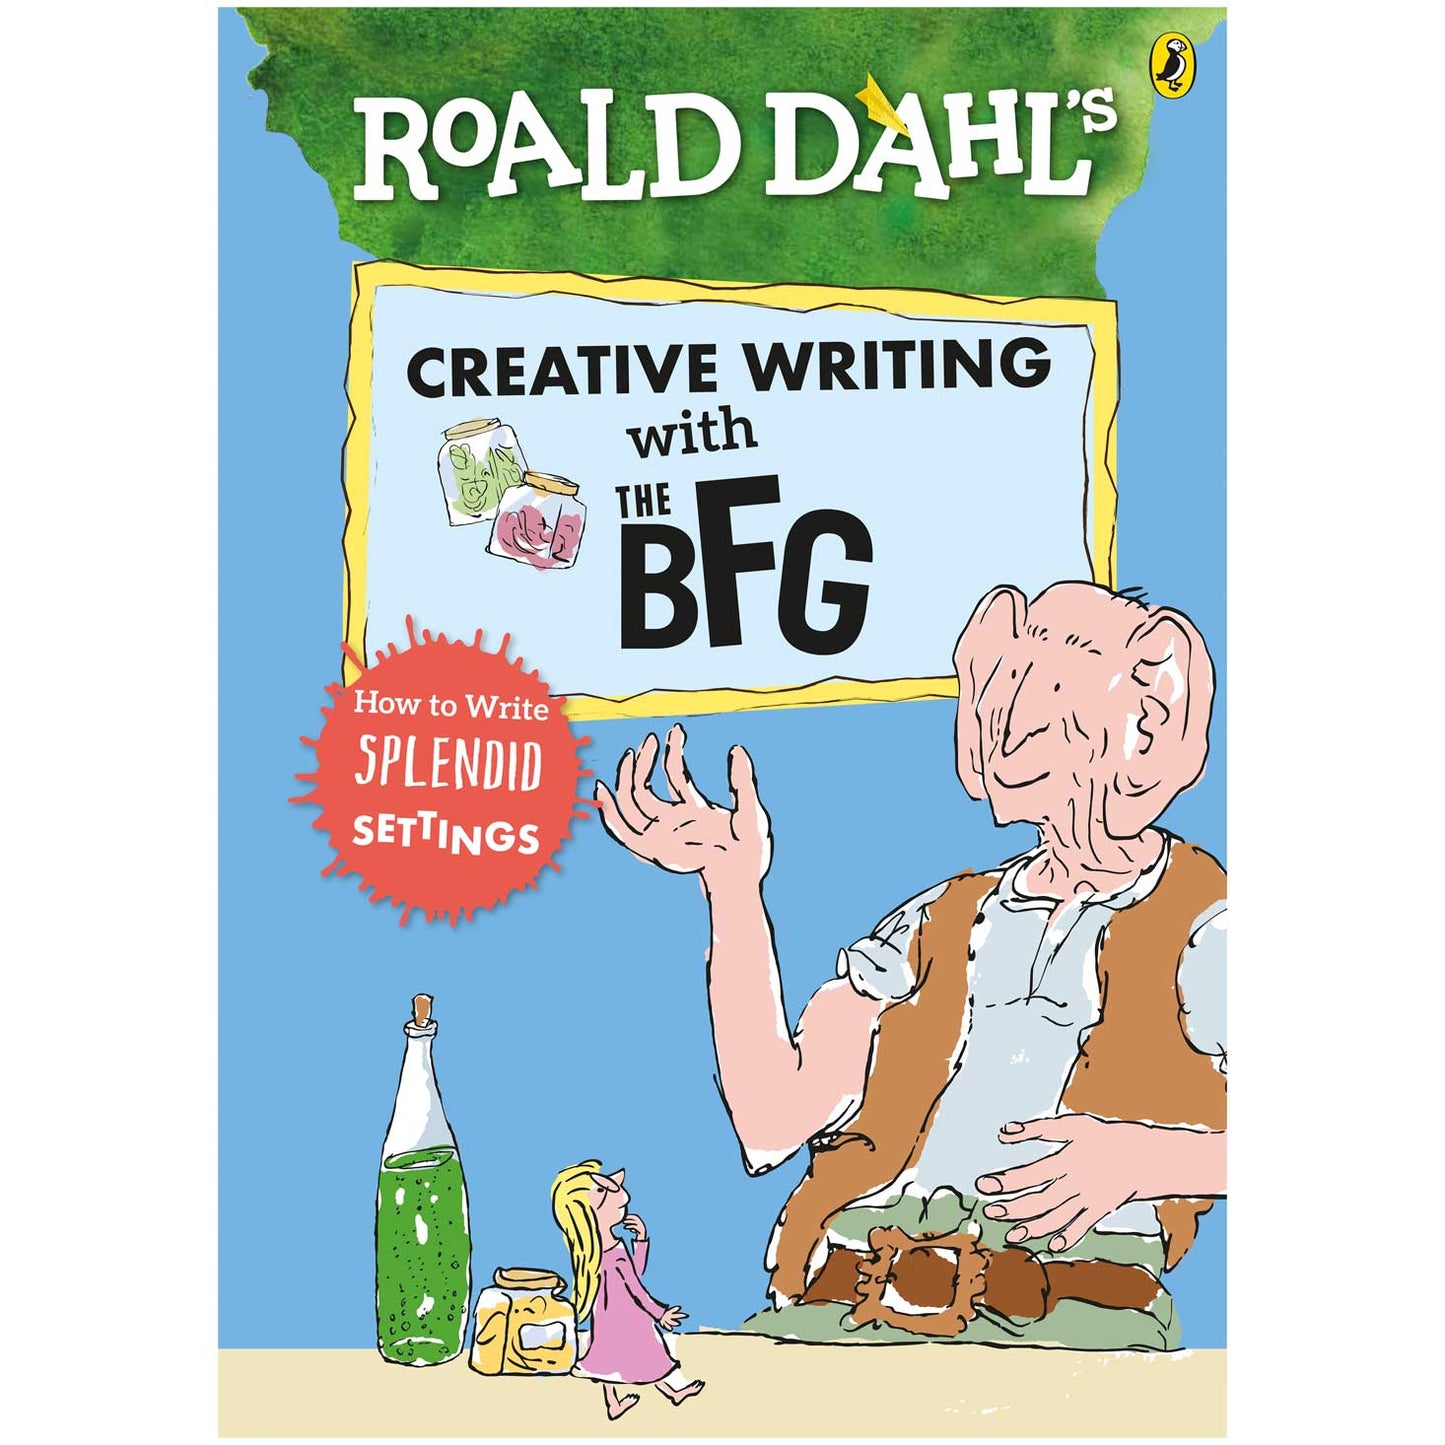 Creative Writing with The BFG based on Roald Dahl with illustrations by Quentin Blake